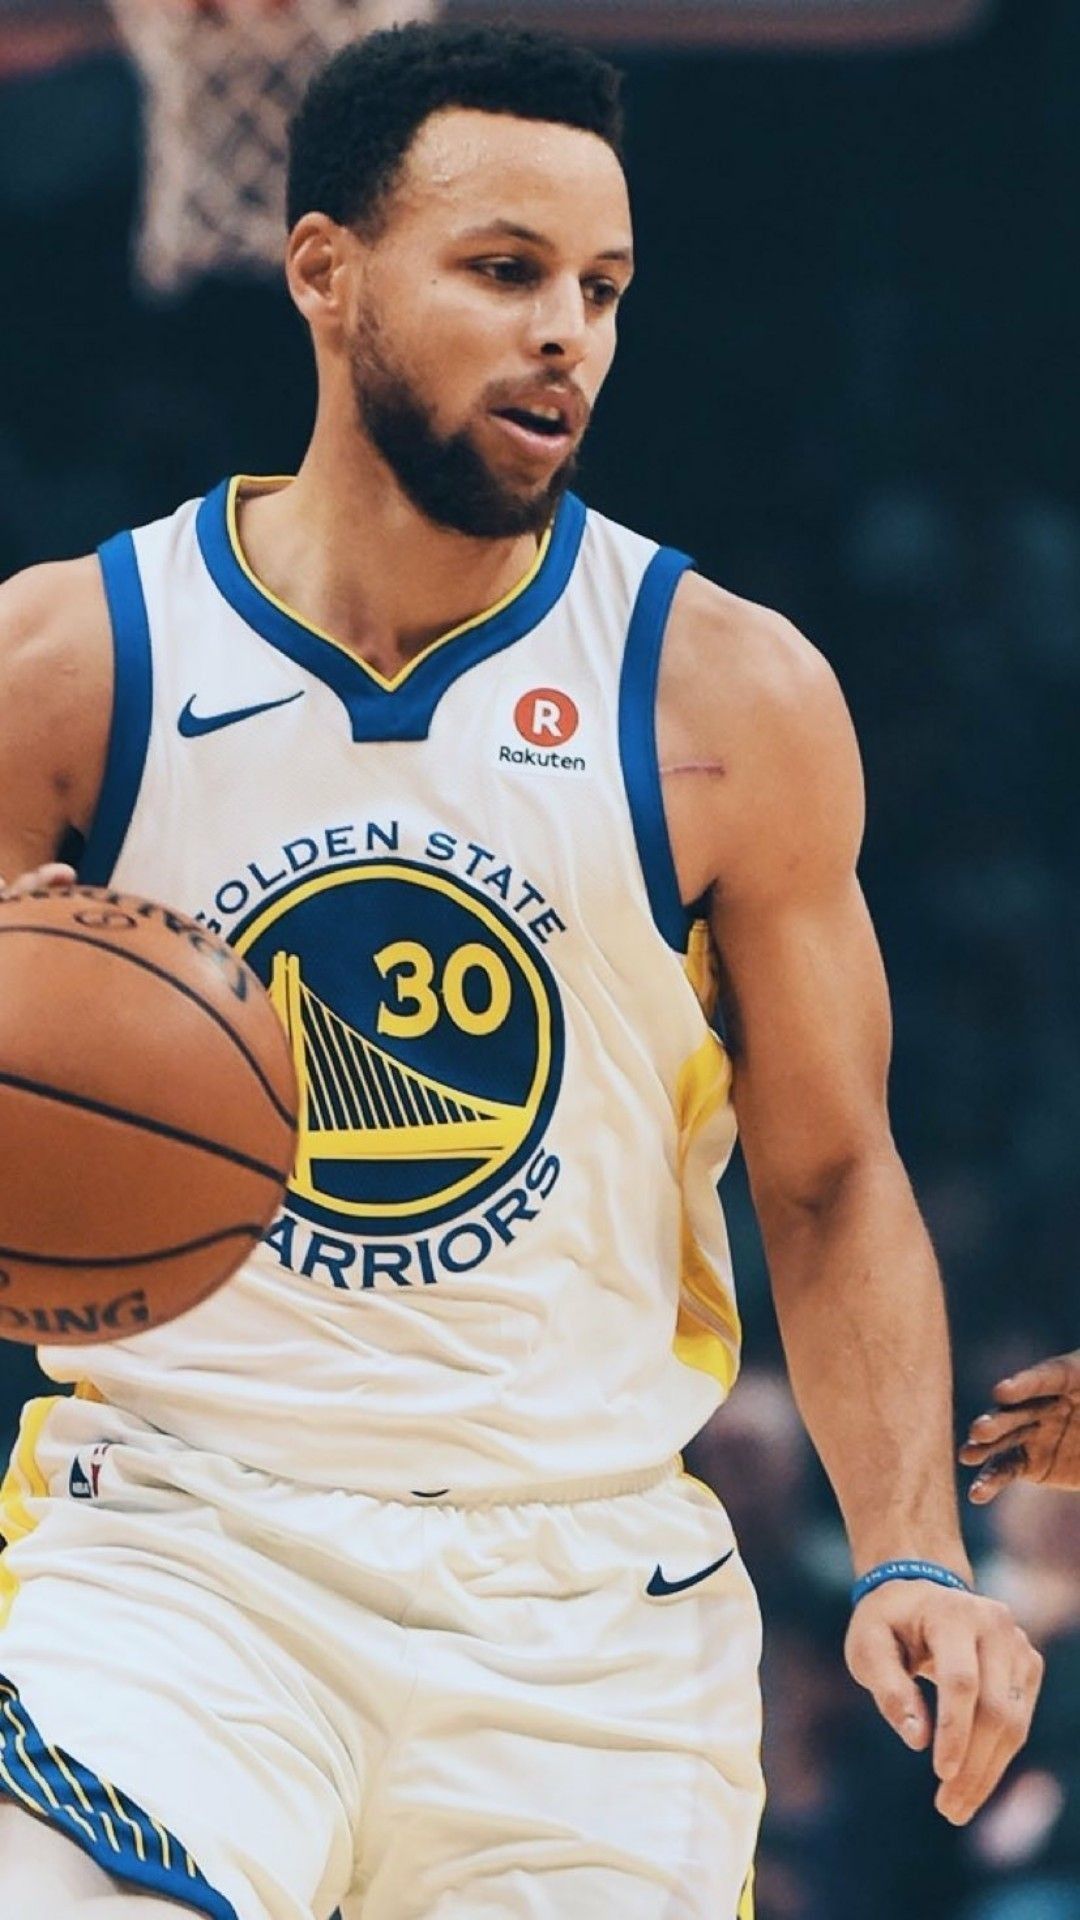 Wallpaper Of Stephen Curry